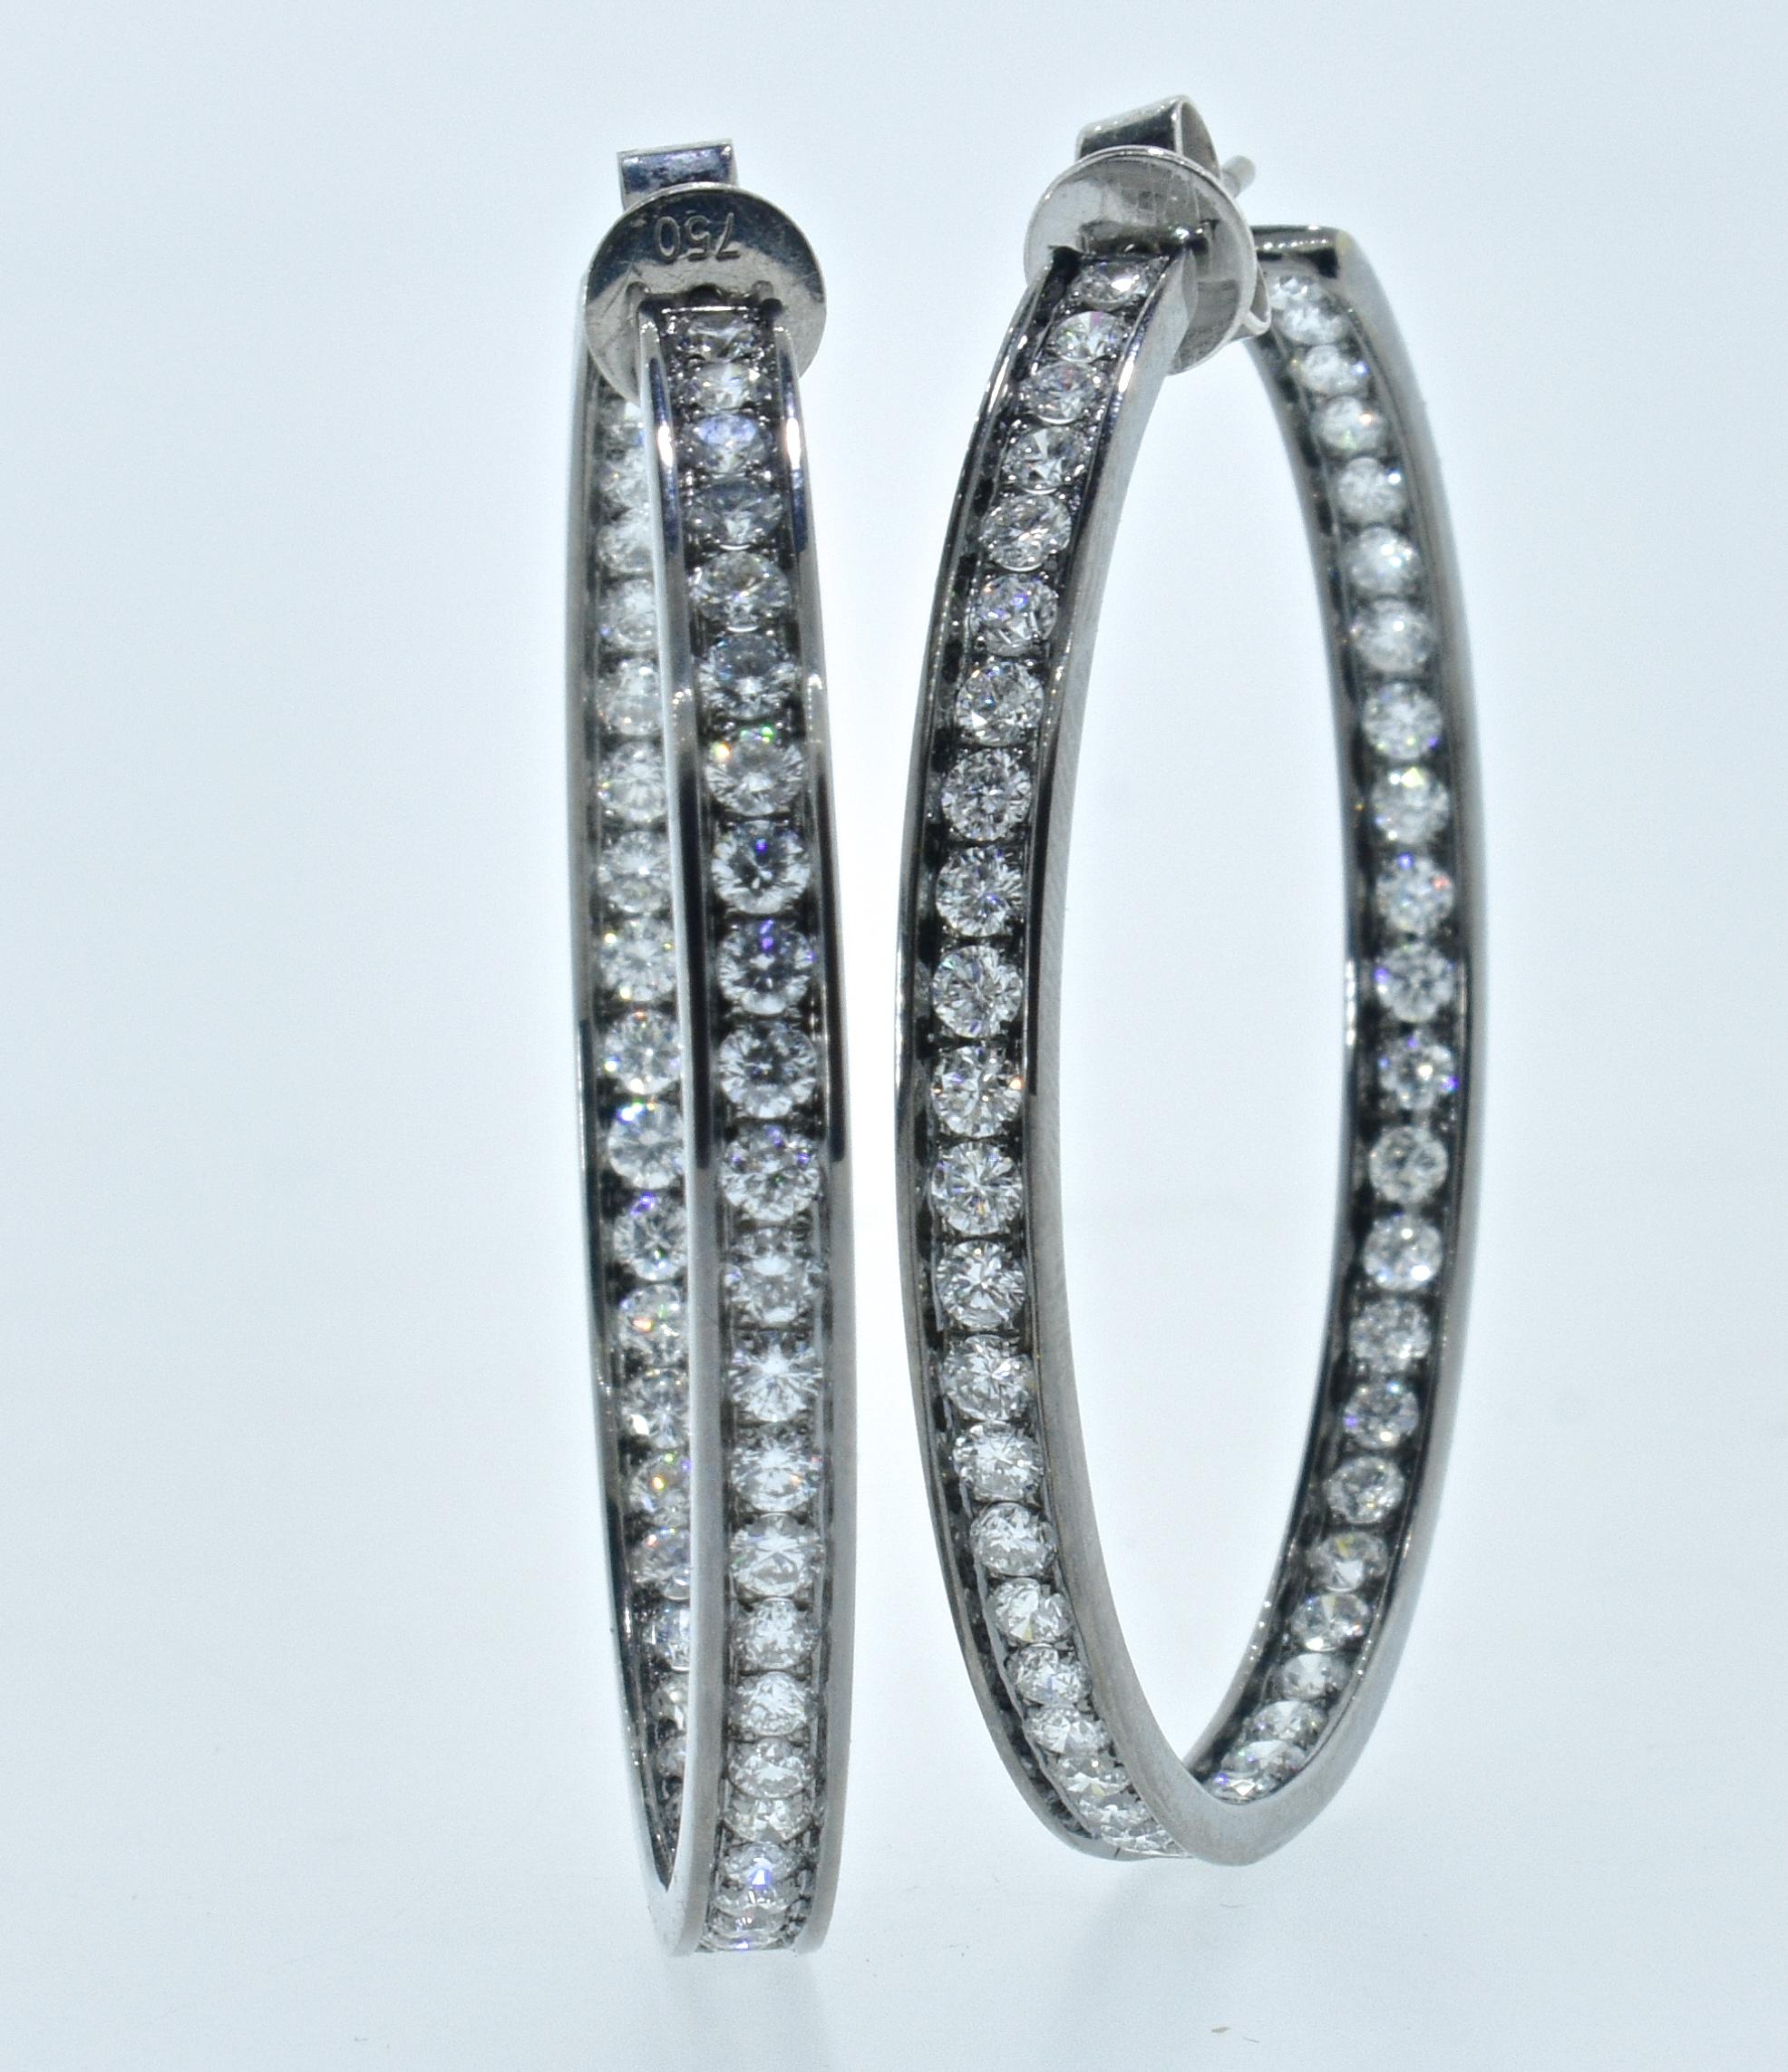 Diamond Hoops with 96 round brilliant cut diamonds amounting to approximately 3.04 cts.  The diamonds are all well matched and well cut and set well in these large hoops.  The diamonds are estimated to be near colorless (G/H), and very to very very